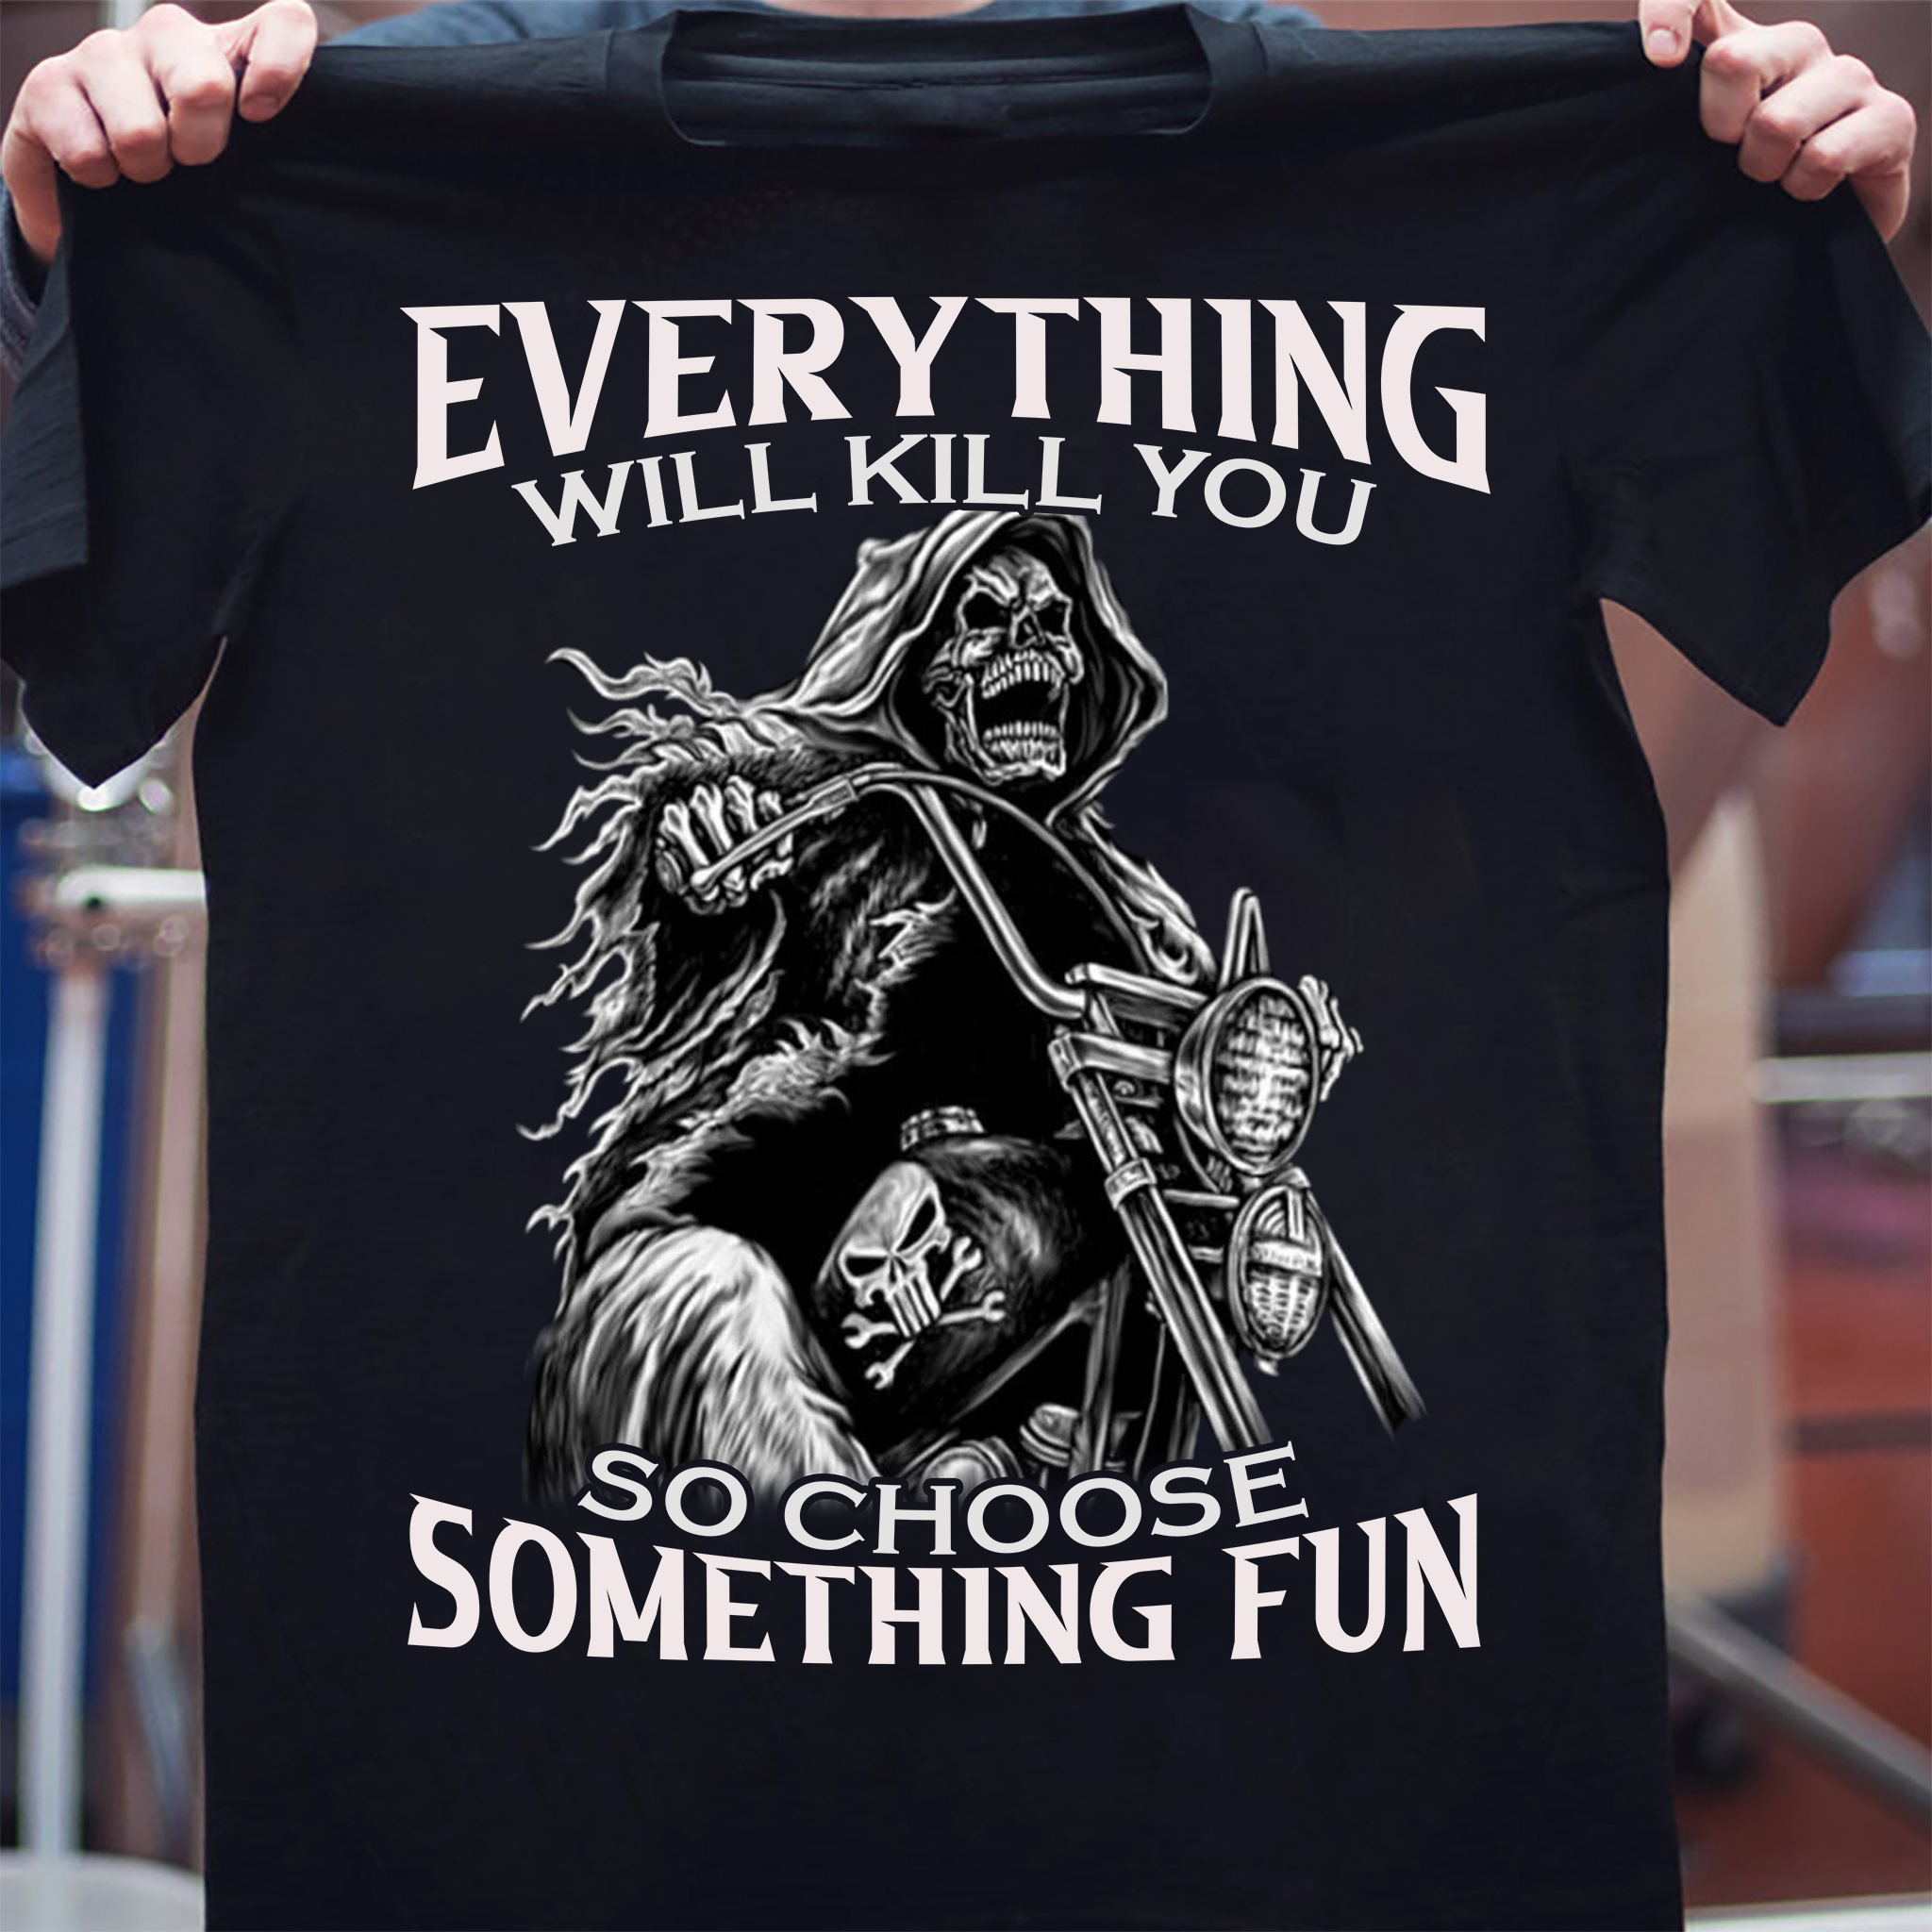 Everything will kill you so choose something fun - Evil driving motorcycle